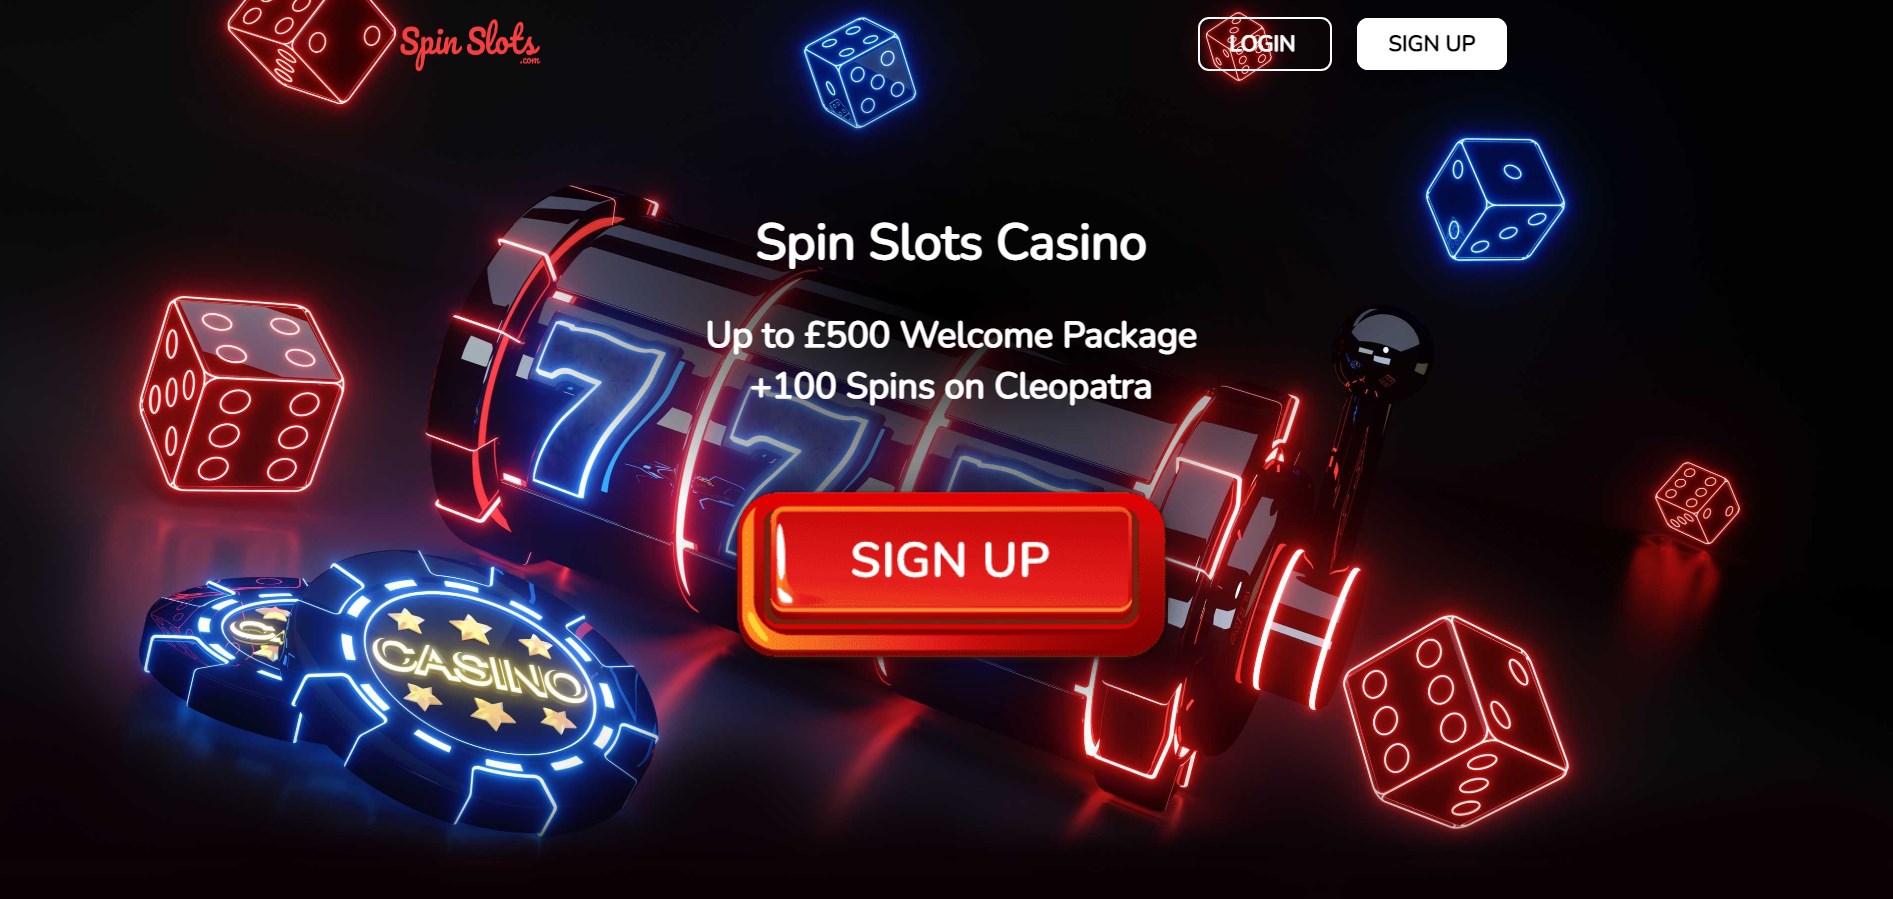 Spin Slots Casino Review